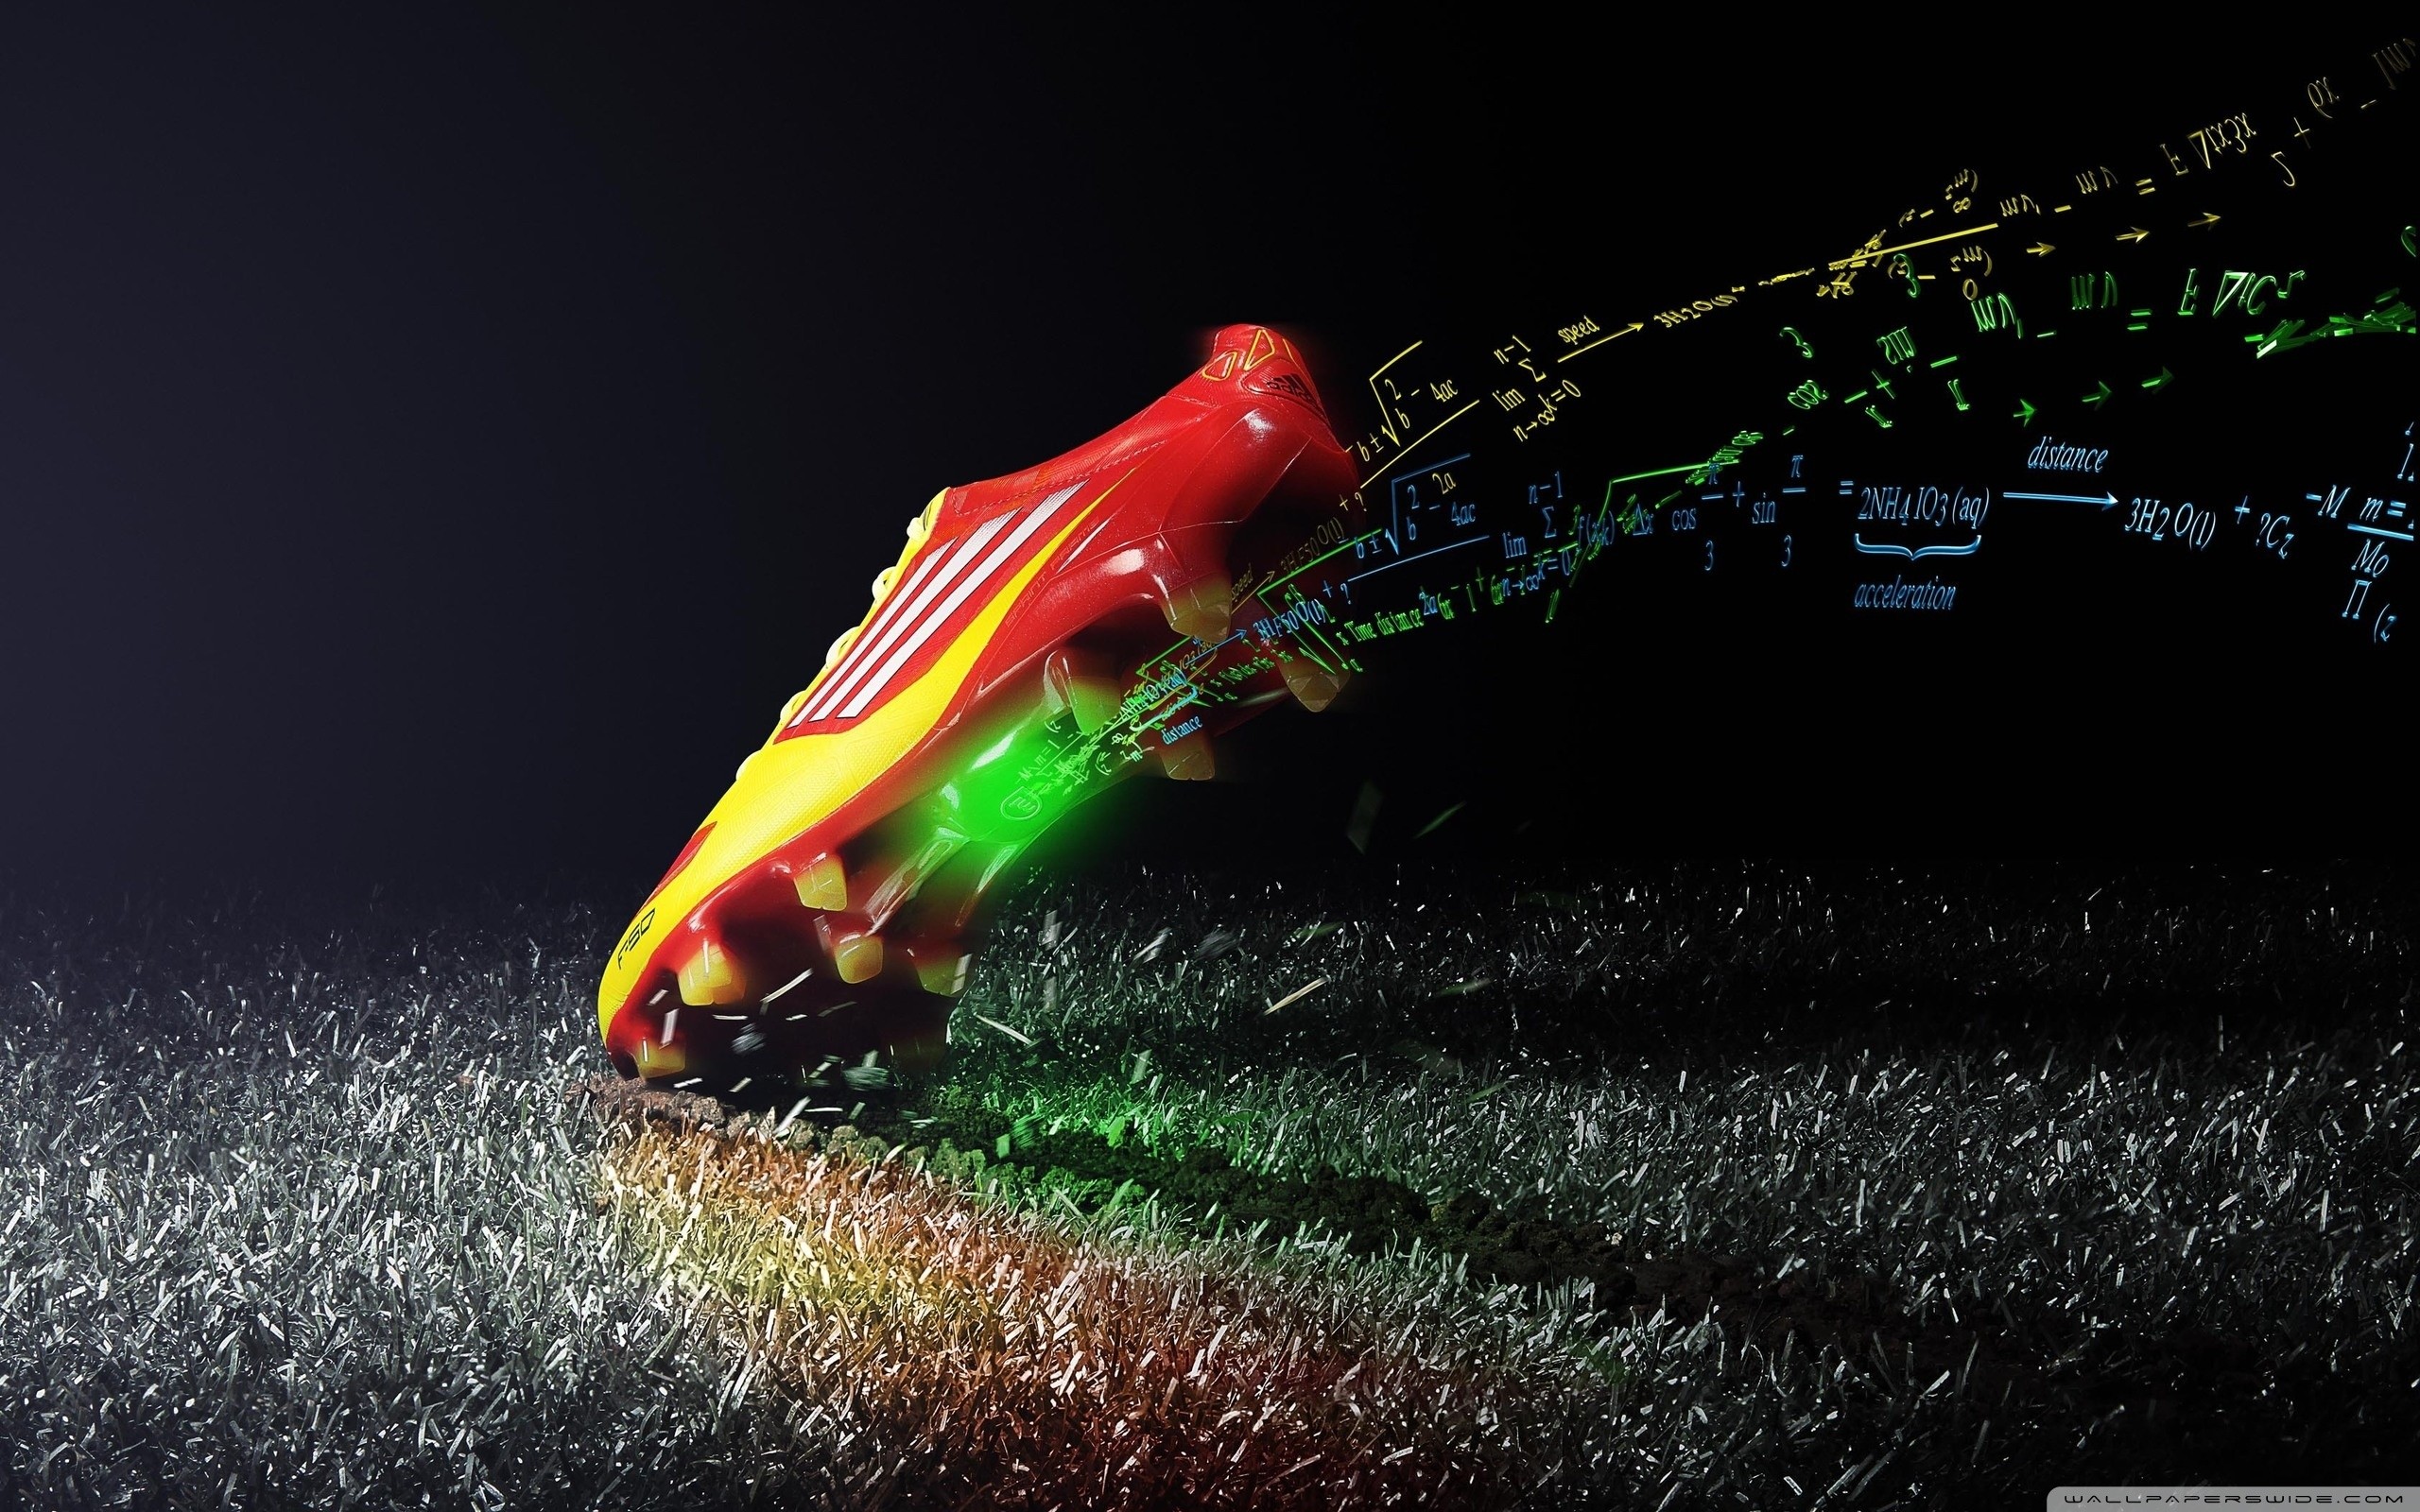 2560x1600 2560 x 1600 px free desktop pictures soccer shoes by Acton London for: TWD